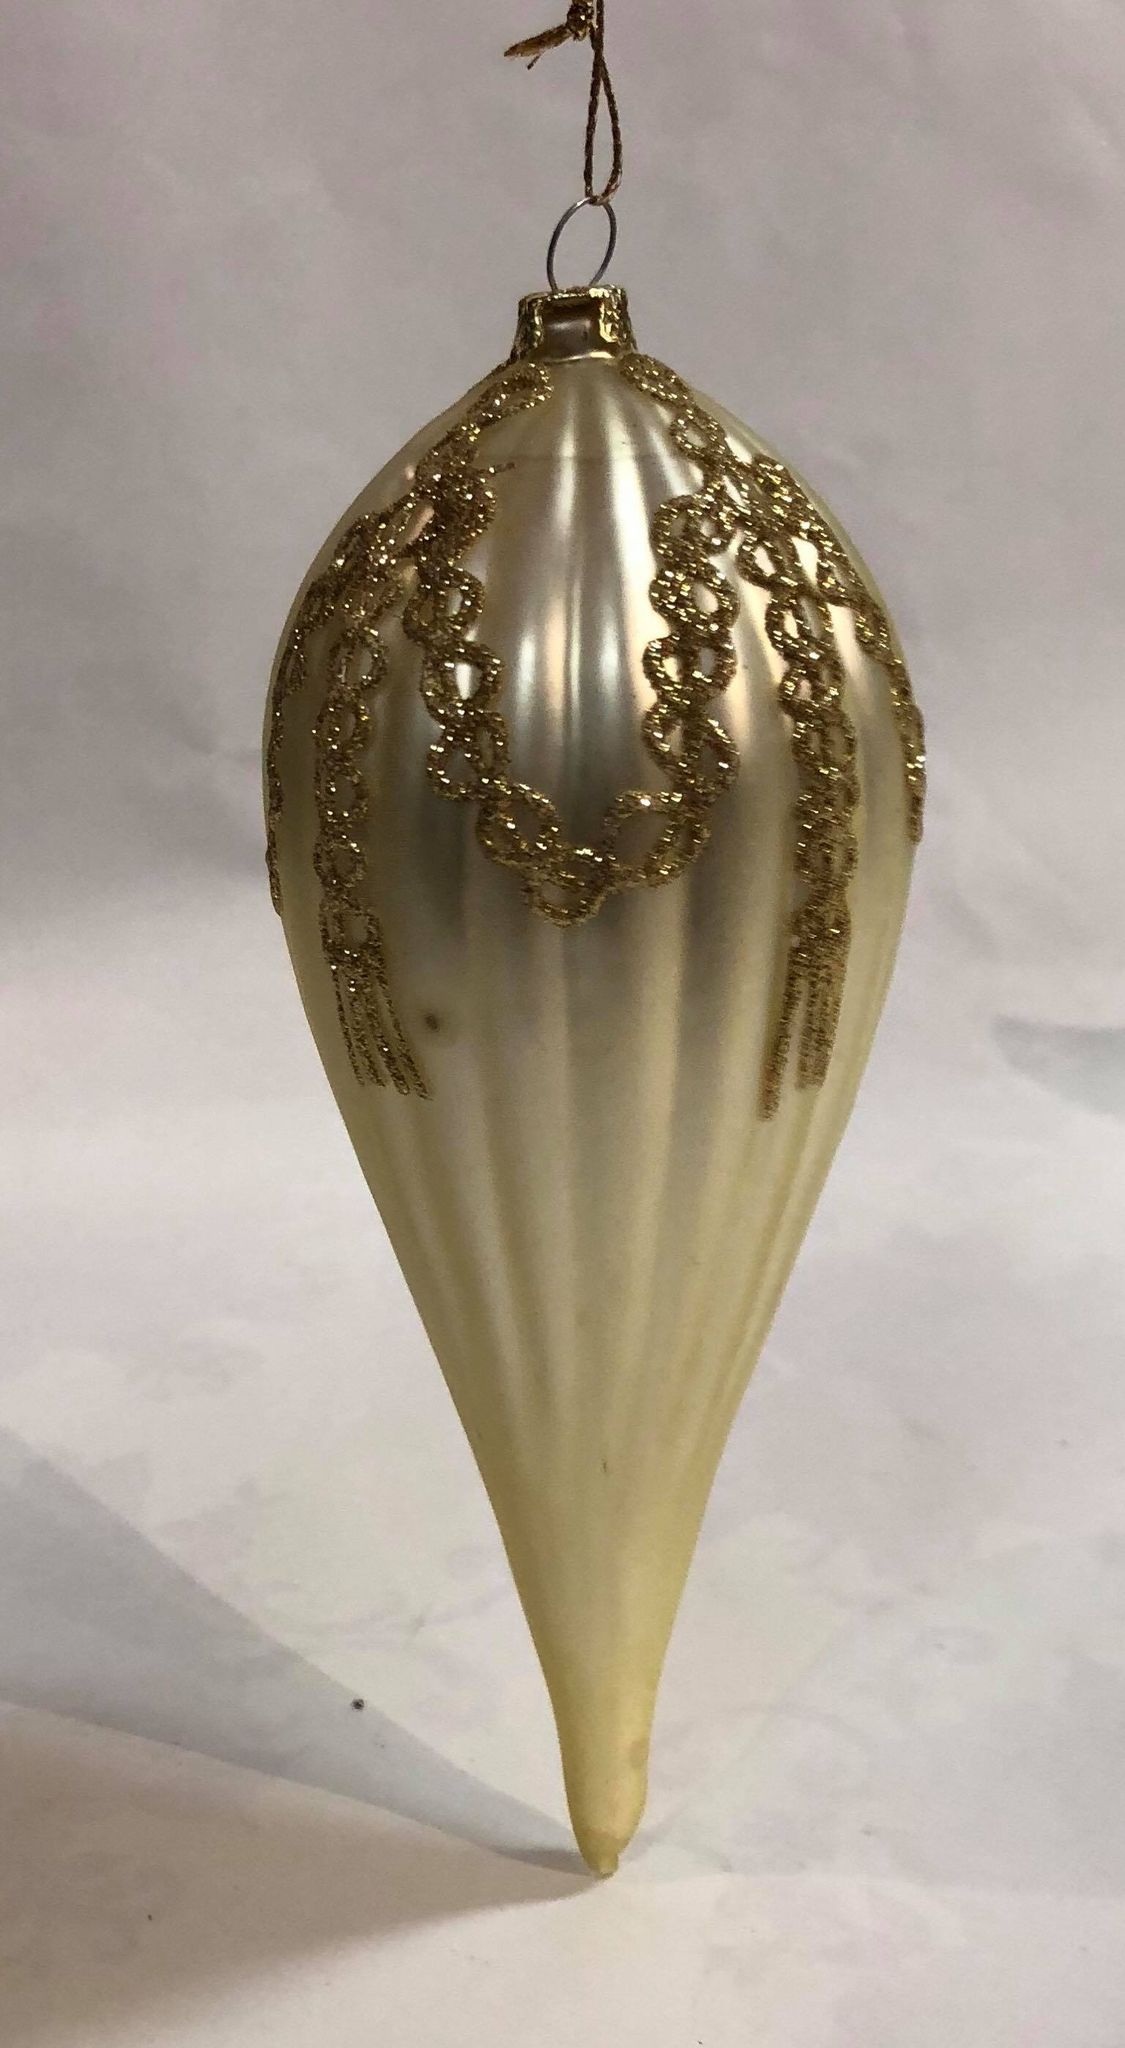 Gold glass ornament with gold details